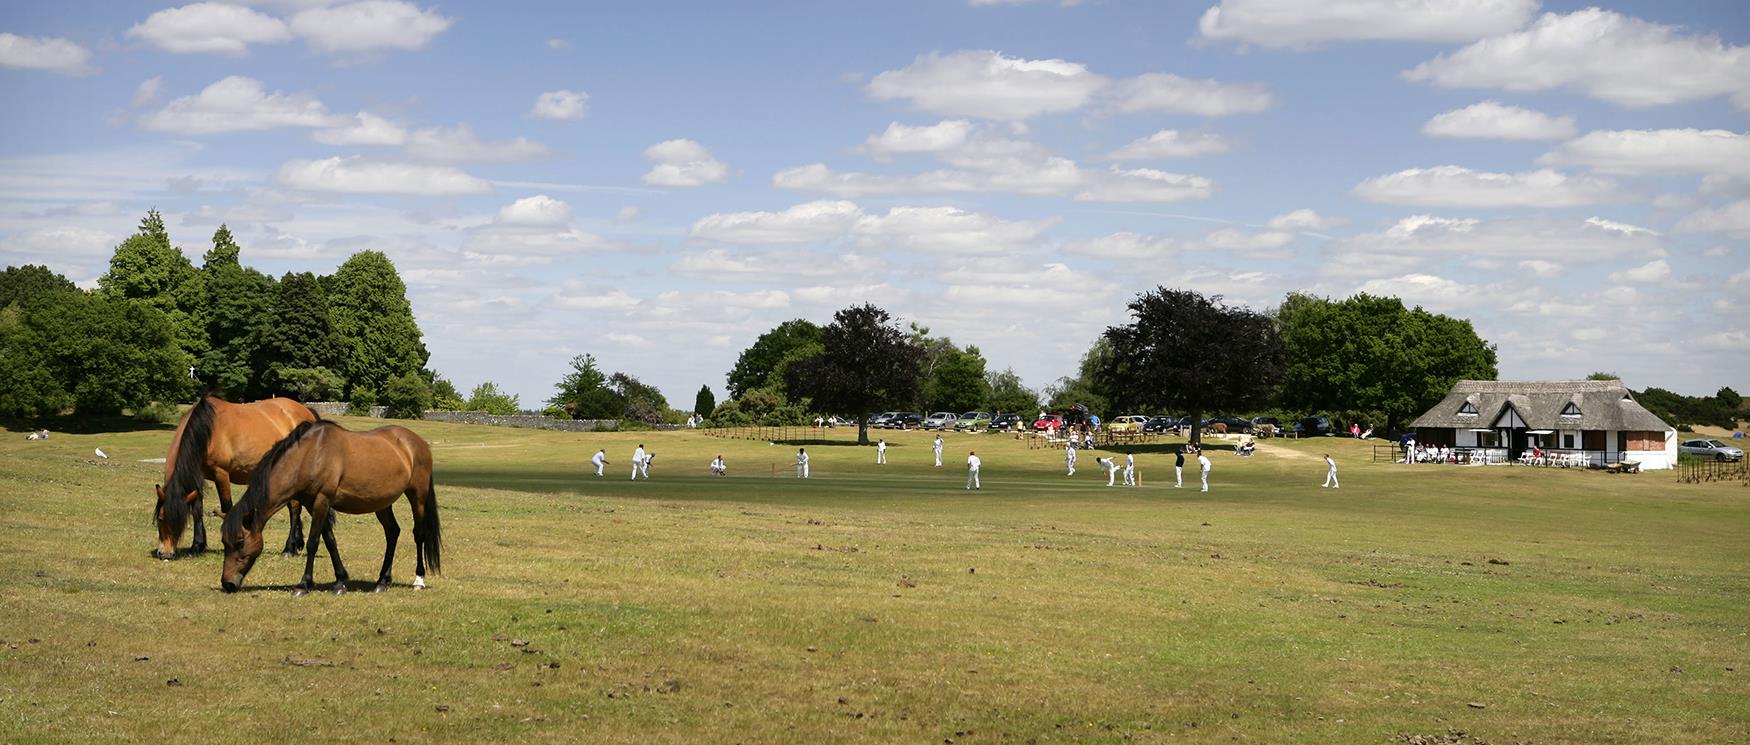 Cricket in the New Forest